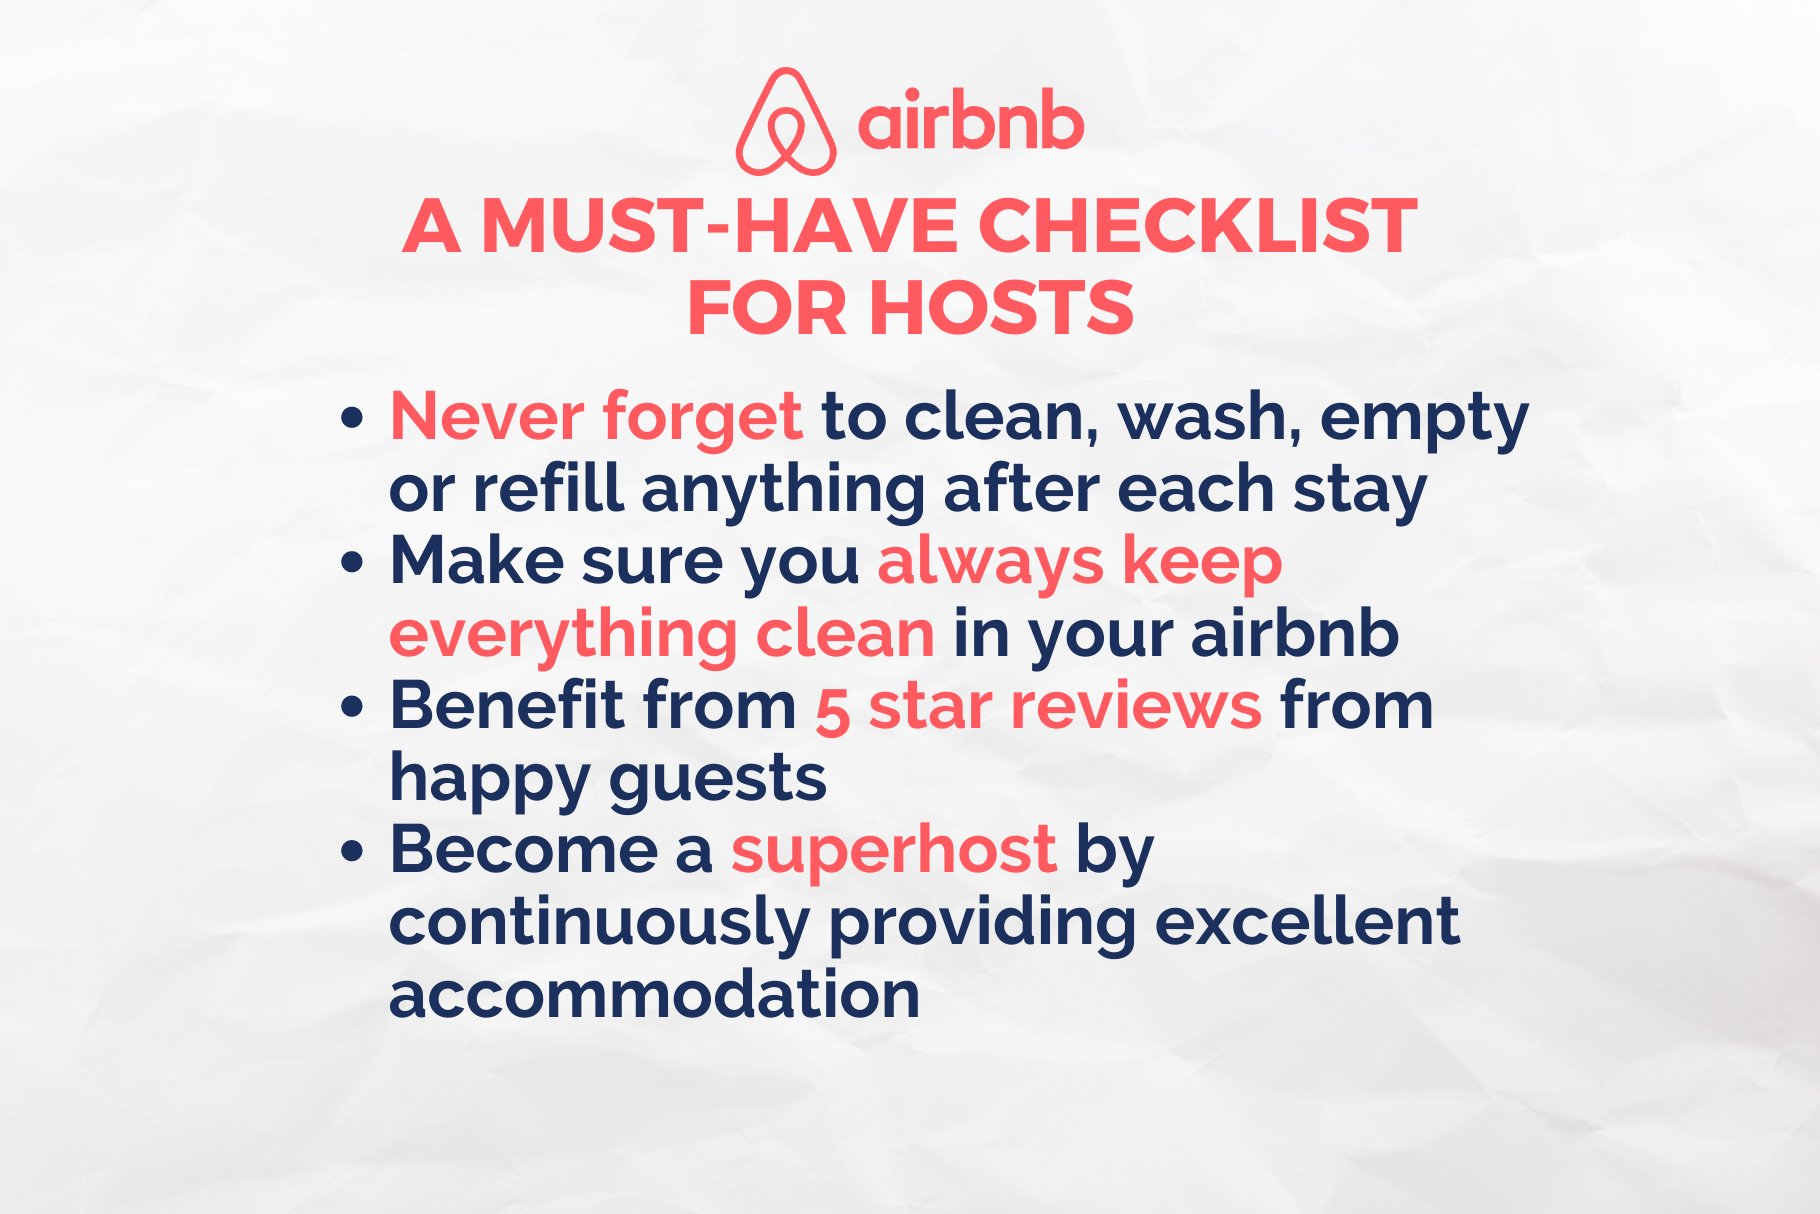 airbnb cleaning checklist teaser cm 2 641